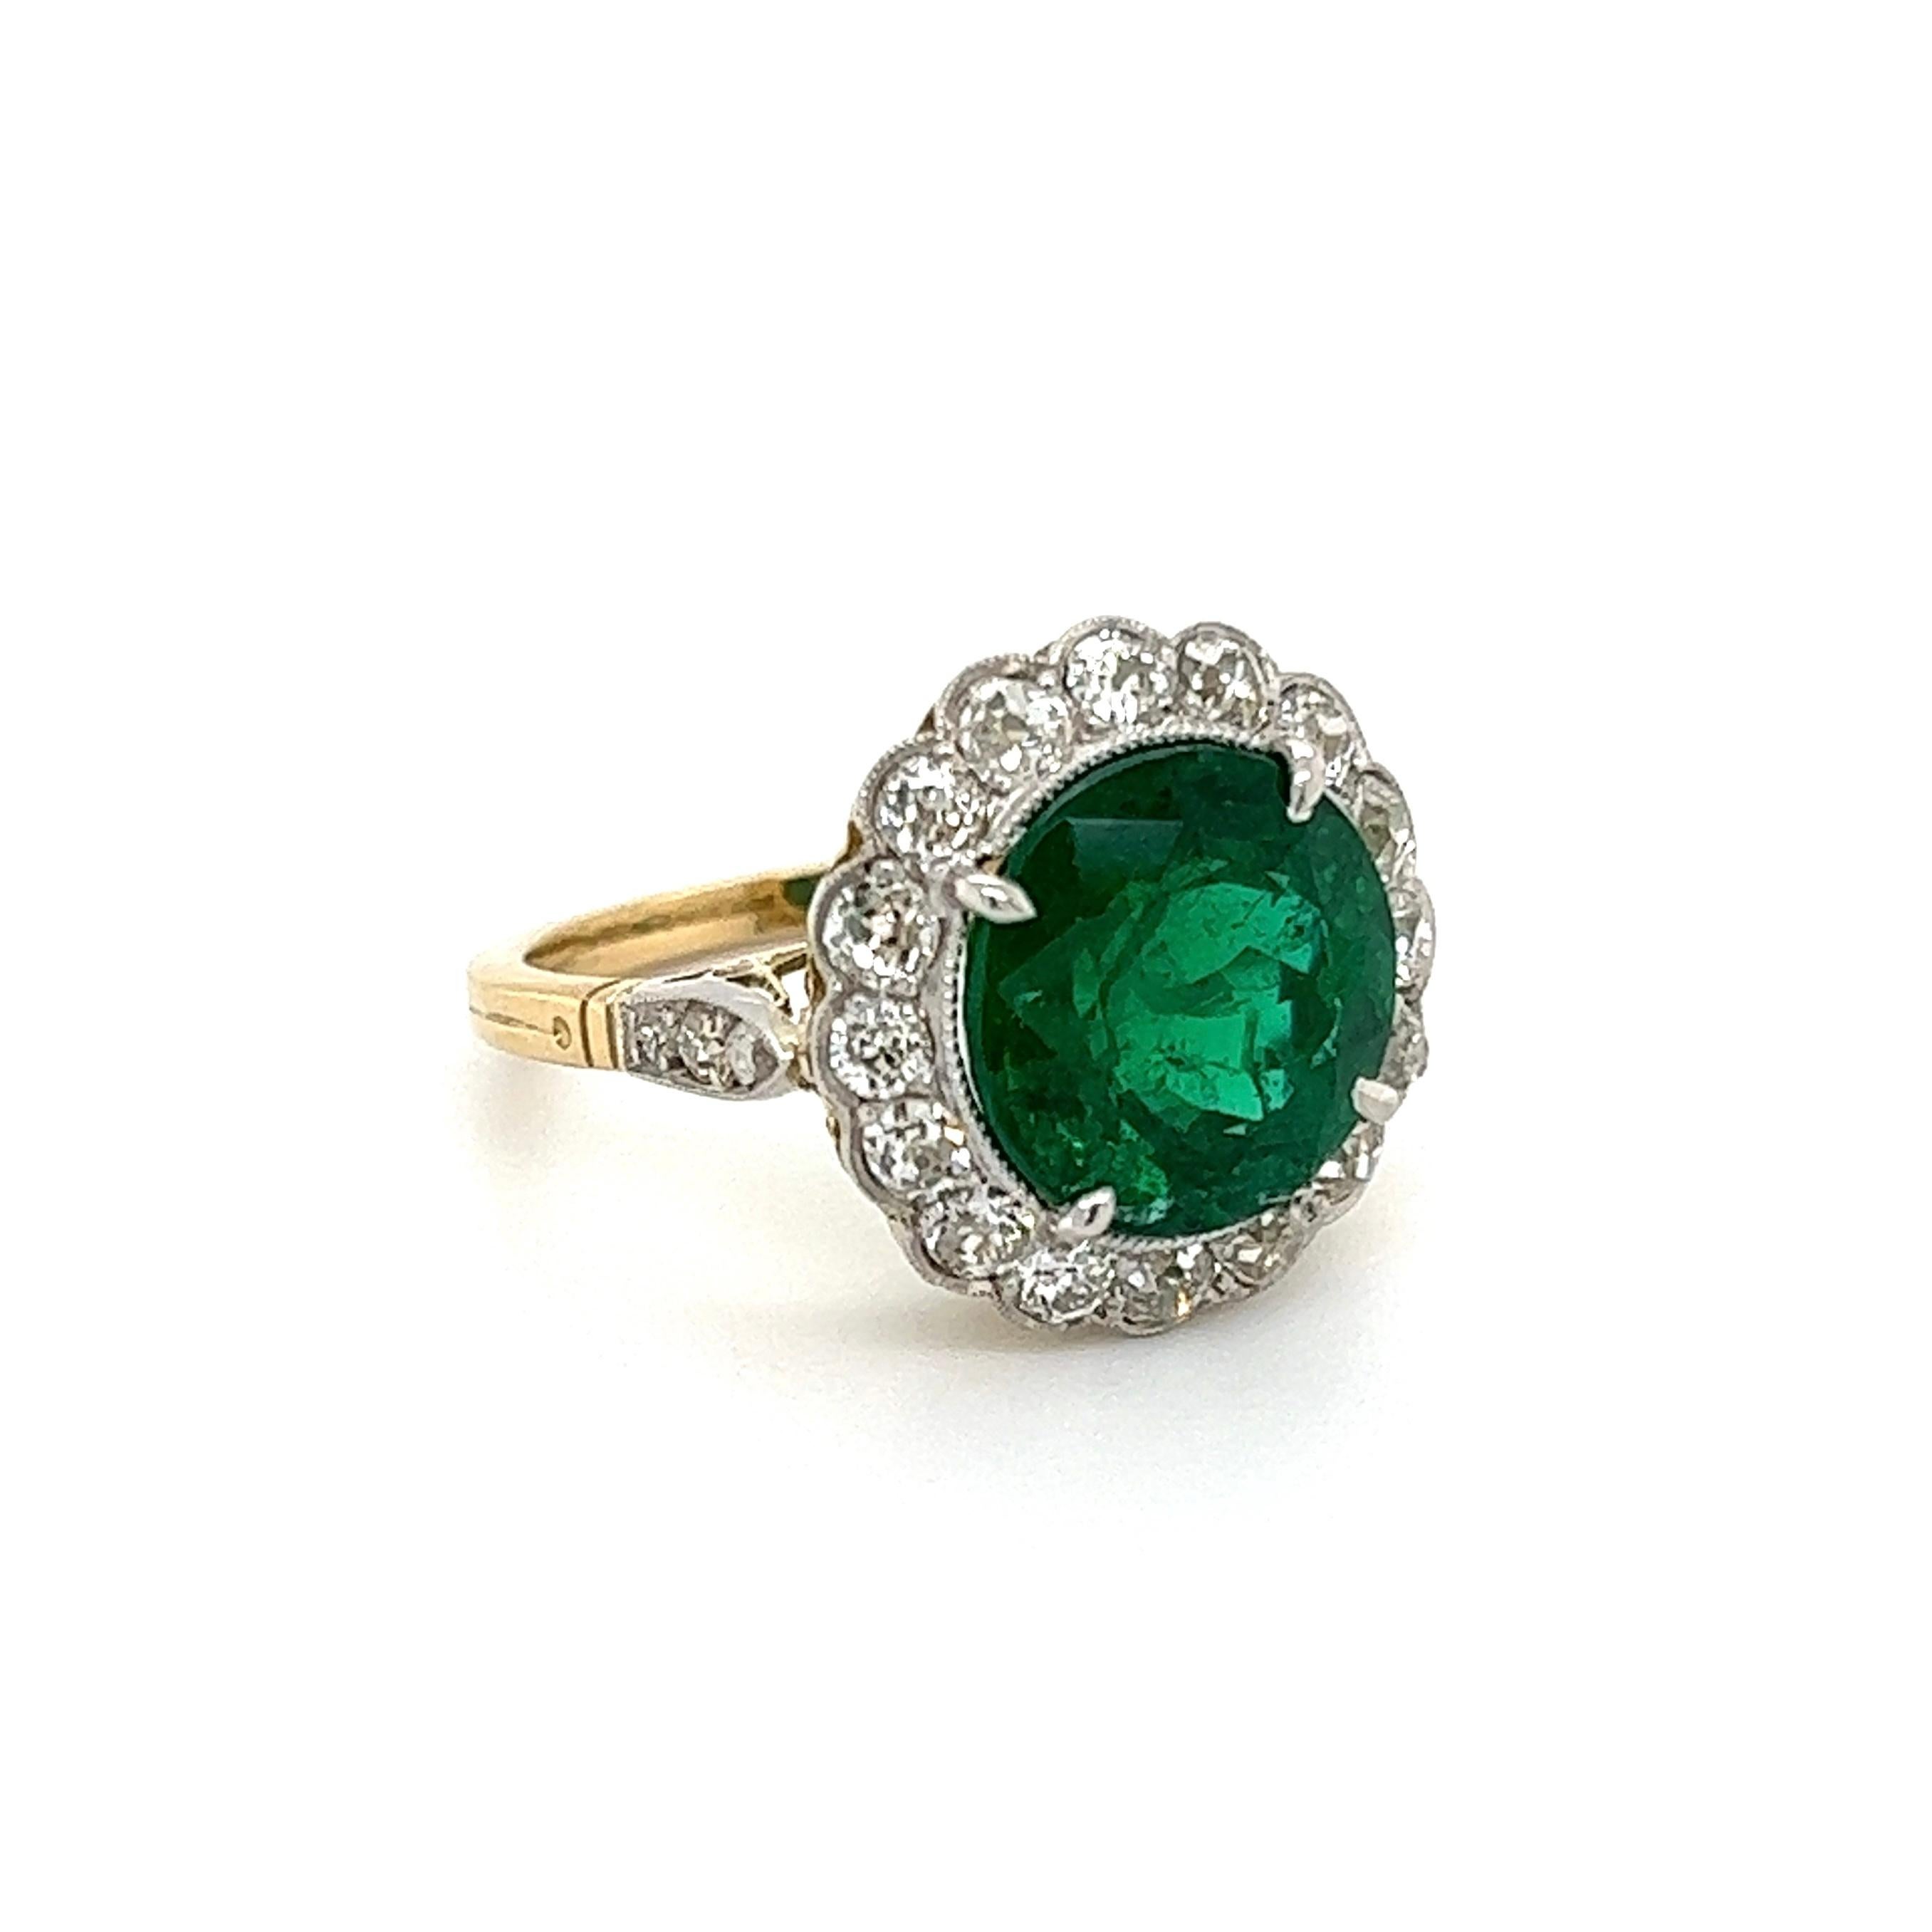 Simply Beautiful! Finely detailed Emerald and Diamond Platinum Cocktail Ring. Centering a securely nestled Round Emerald, weighing approx. 4.93 Carat, surrounded by Diamonds and including side Diamonds enhancing the shank, weighing approx. 1.30tcw.